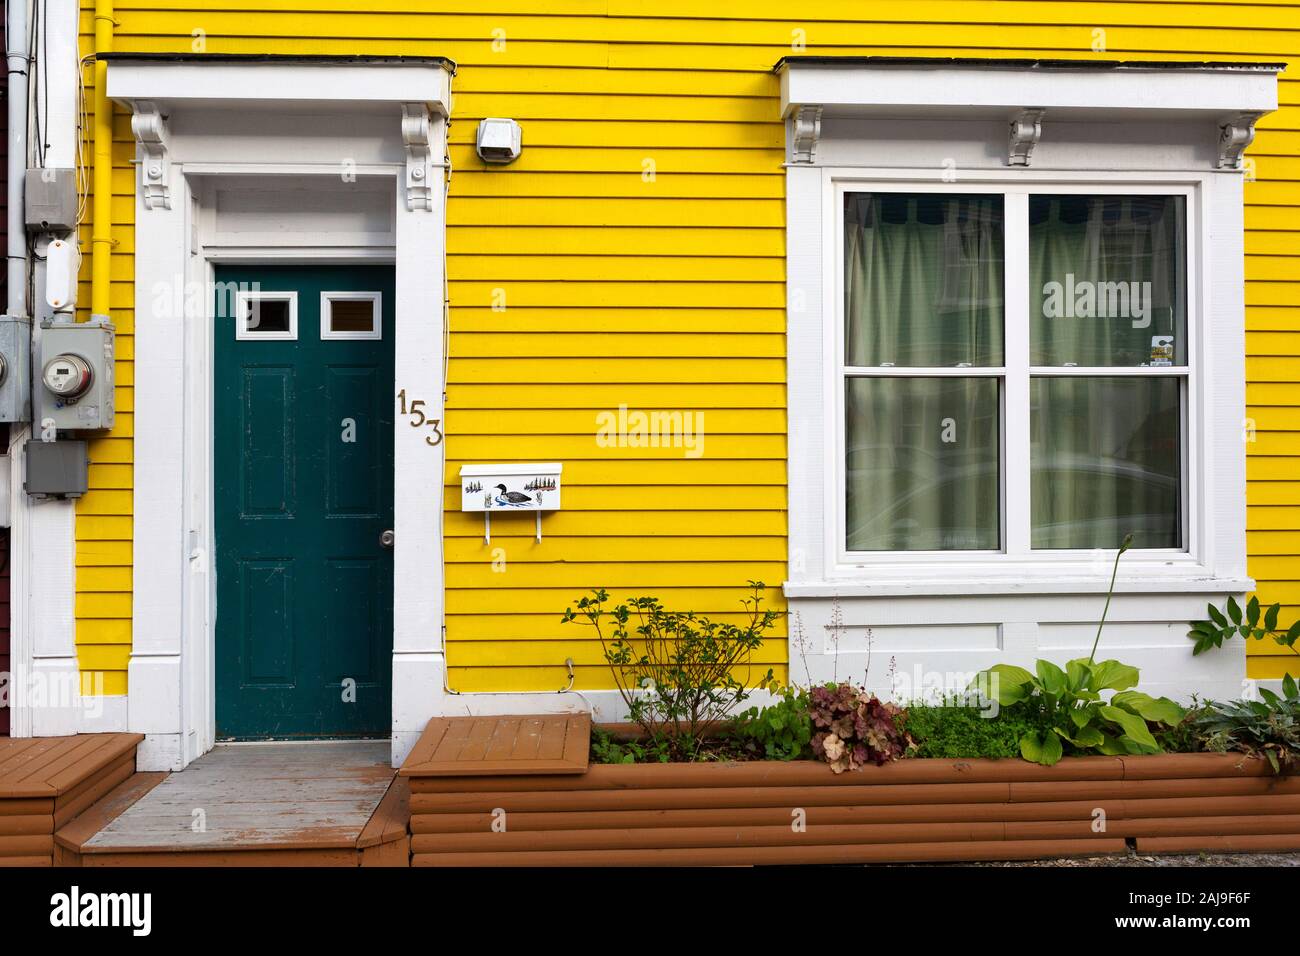 Facade of a yellow house in St John's, Newfoundland and Labrador, Canada. The house has a white window. Stock Photo